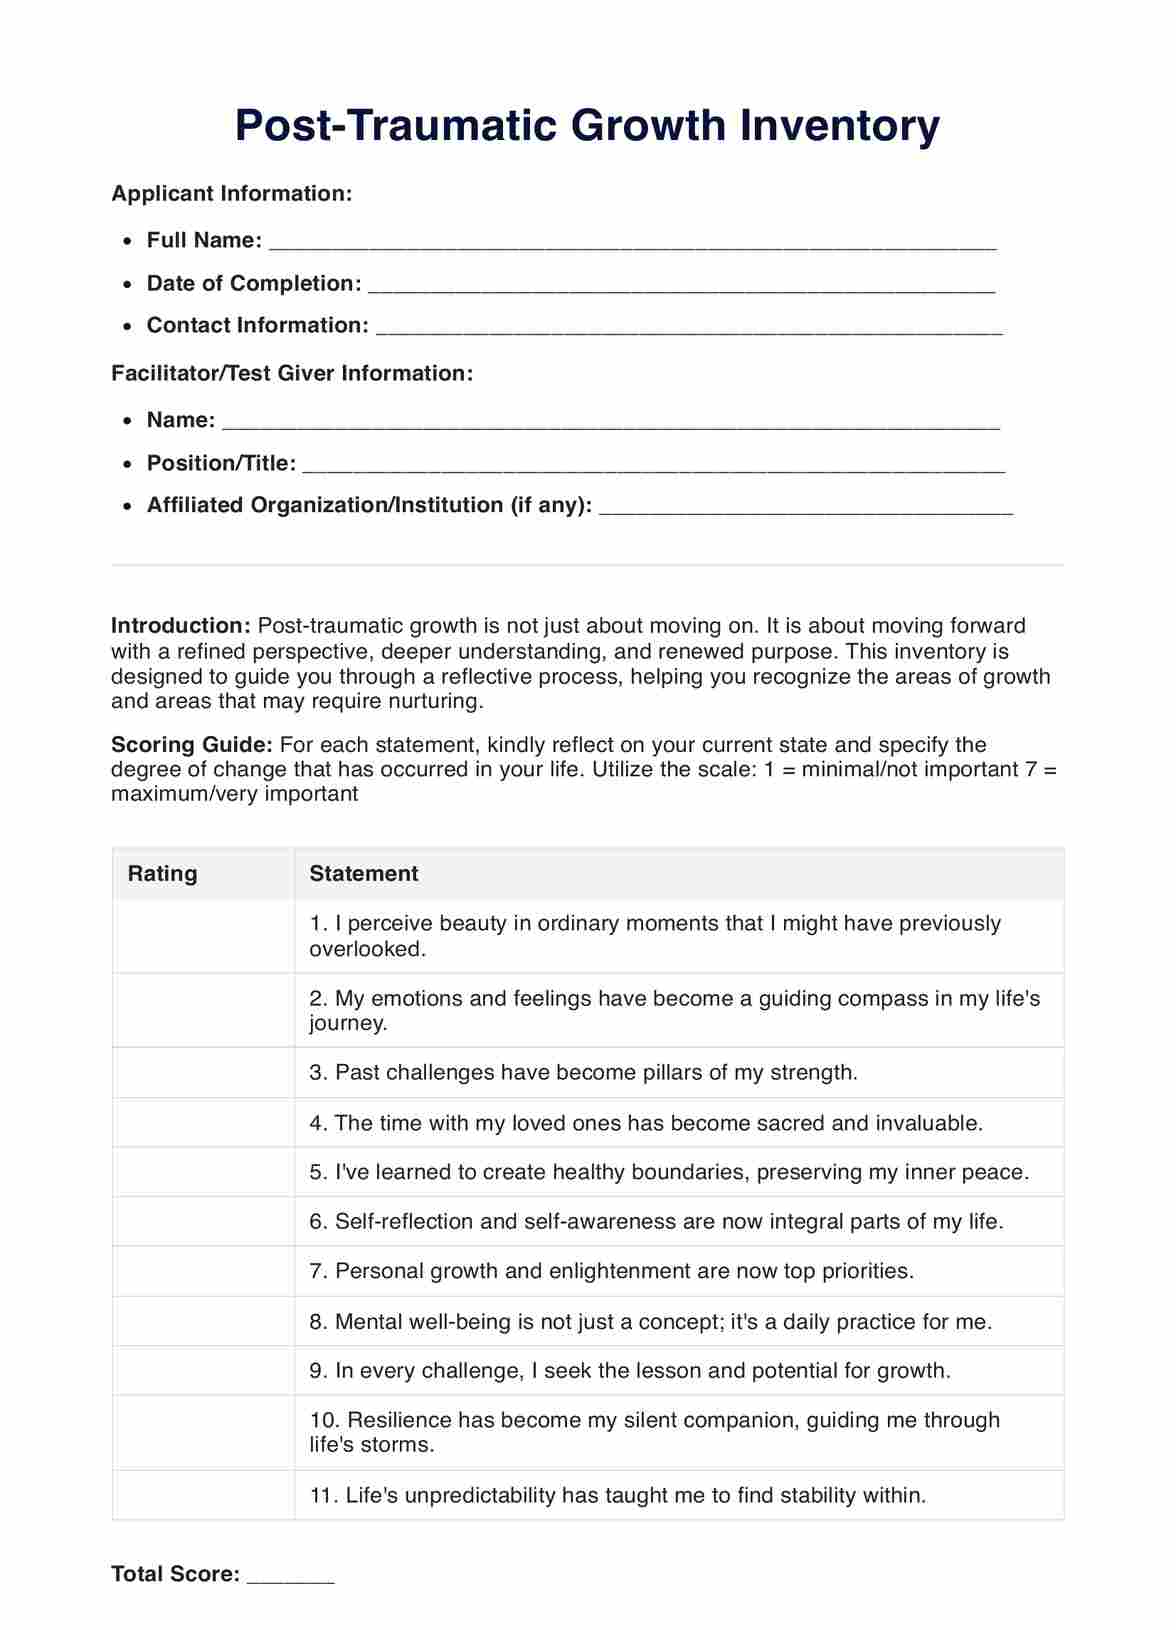 Post-Traumatic Growth Inventory and Worksheet PDF Example